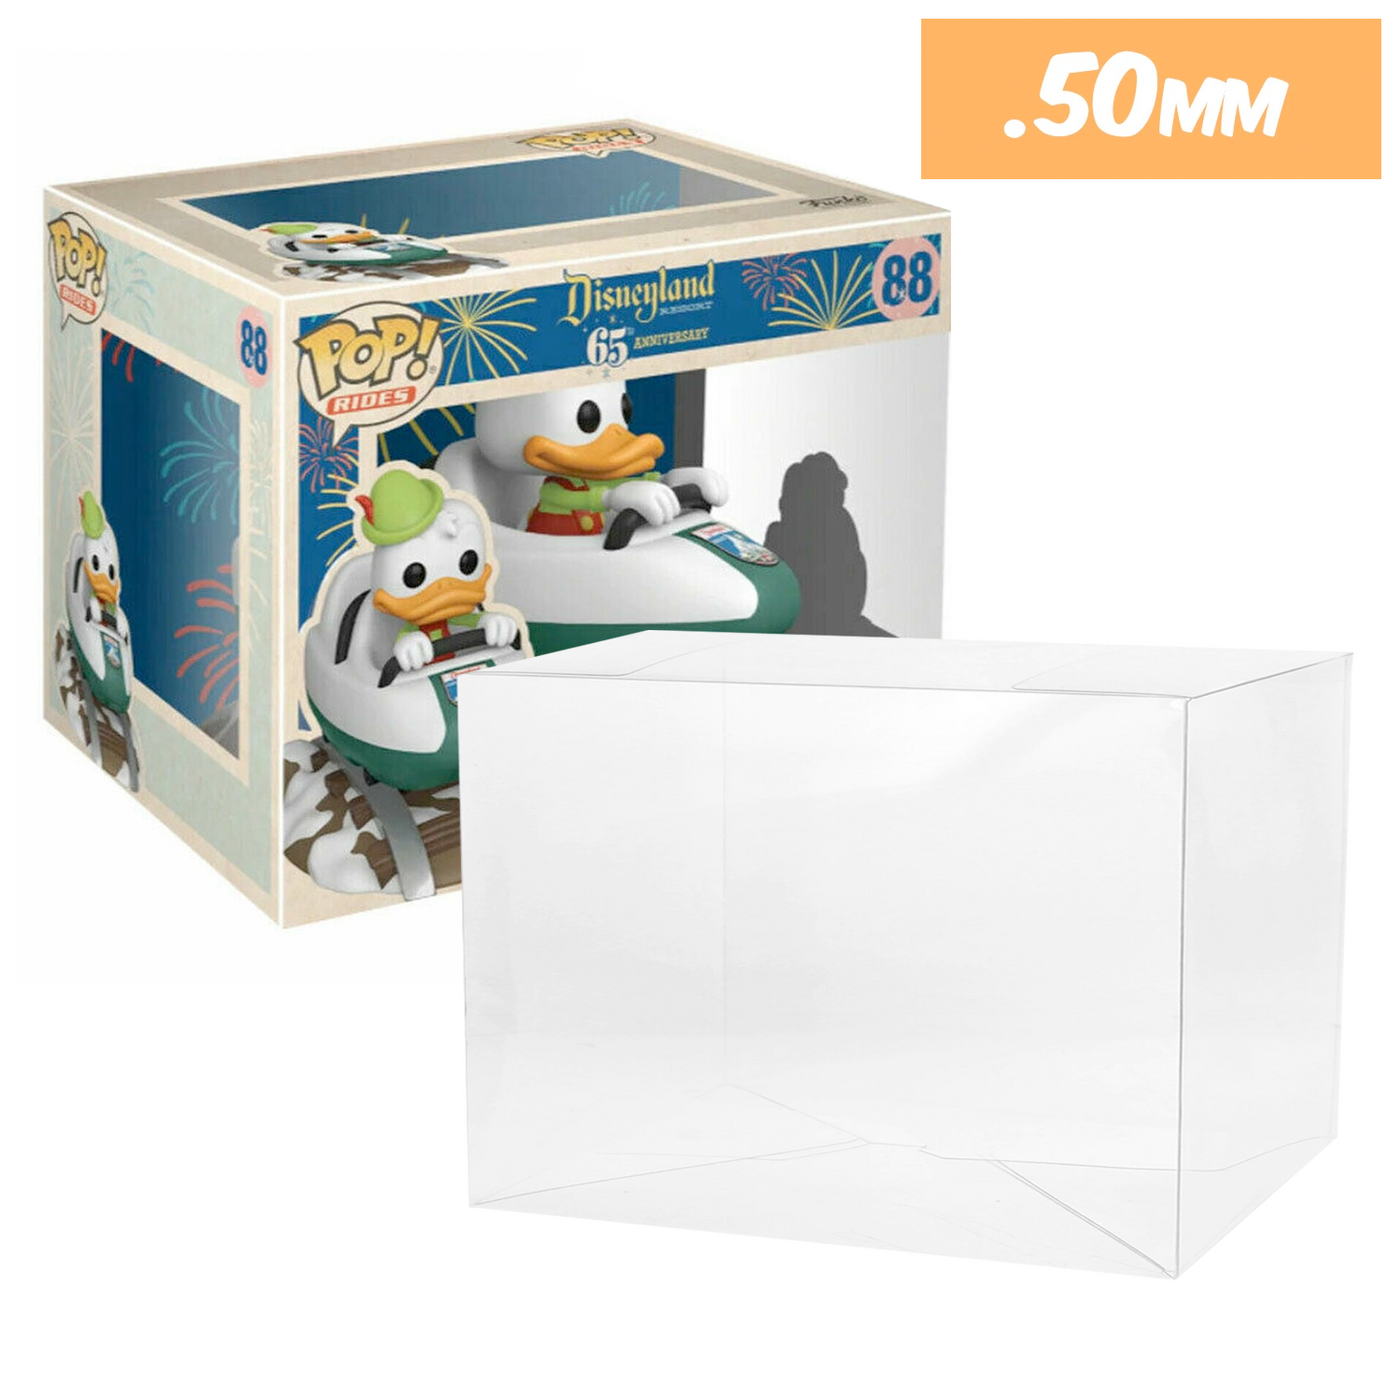 donald duck large matterhorn pop rides best funko pop protectors thick strong uv scratch flat top stack vinyl display geek plastic shield vaulted eco armor fits collect protect display case kollector protector